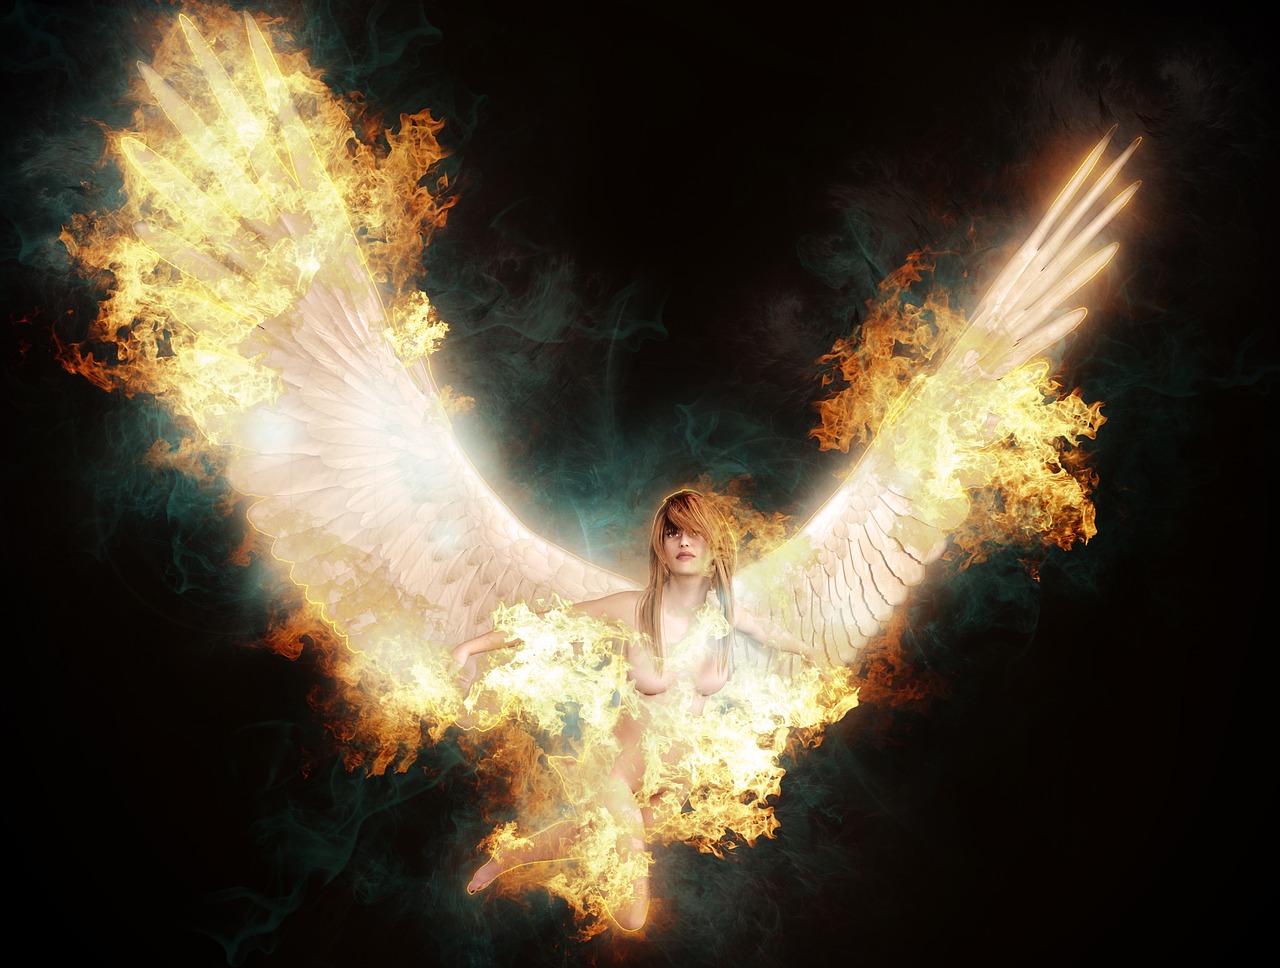 an image of an angel with fire coming out of it's wings, digital art, inspired by Jan Baptist Weenix, digital art, aphrodite goddess of love, high quality fantasy stock photo, taylor swift as a heavenly angel, biblically accurate angel